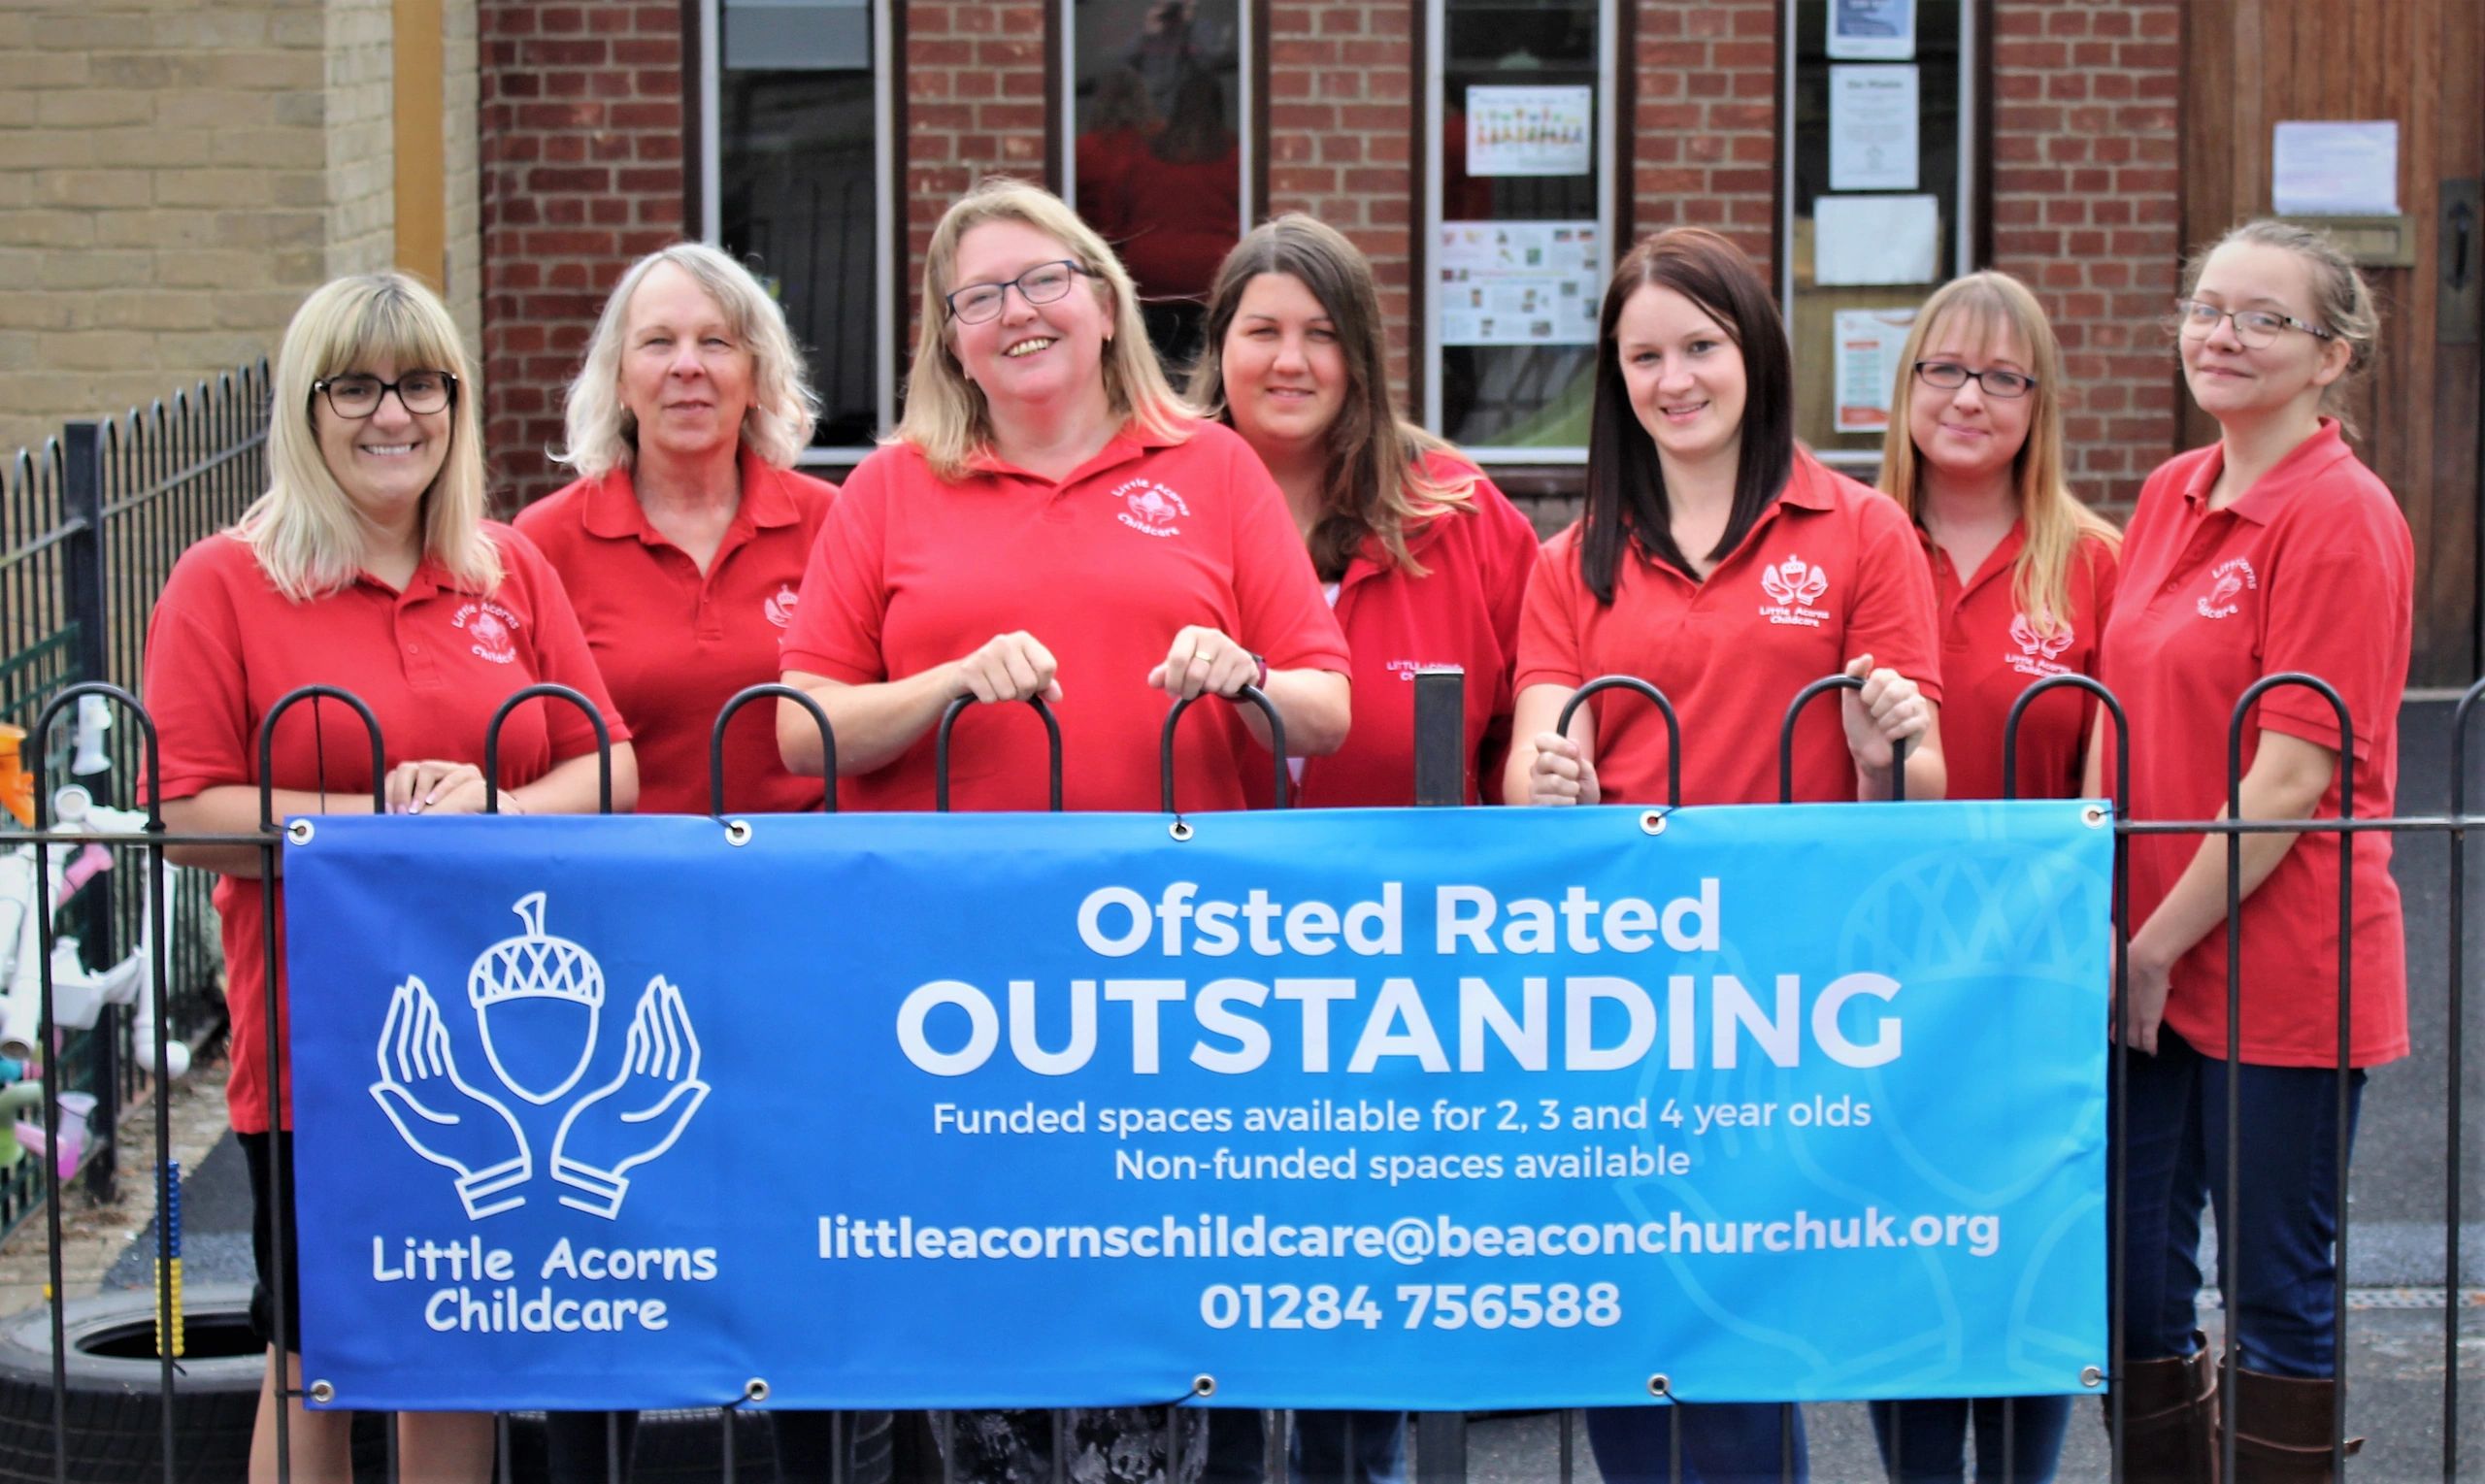 Our Outstanding Team. Ofsted Rated Outstanding.